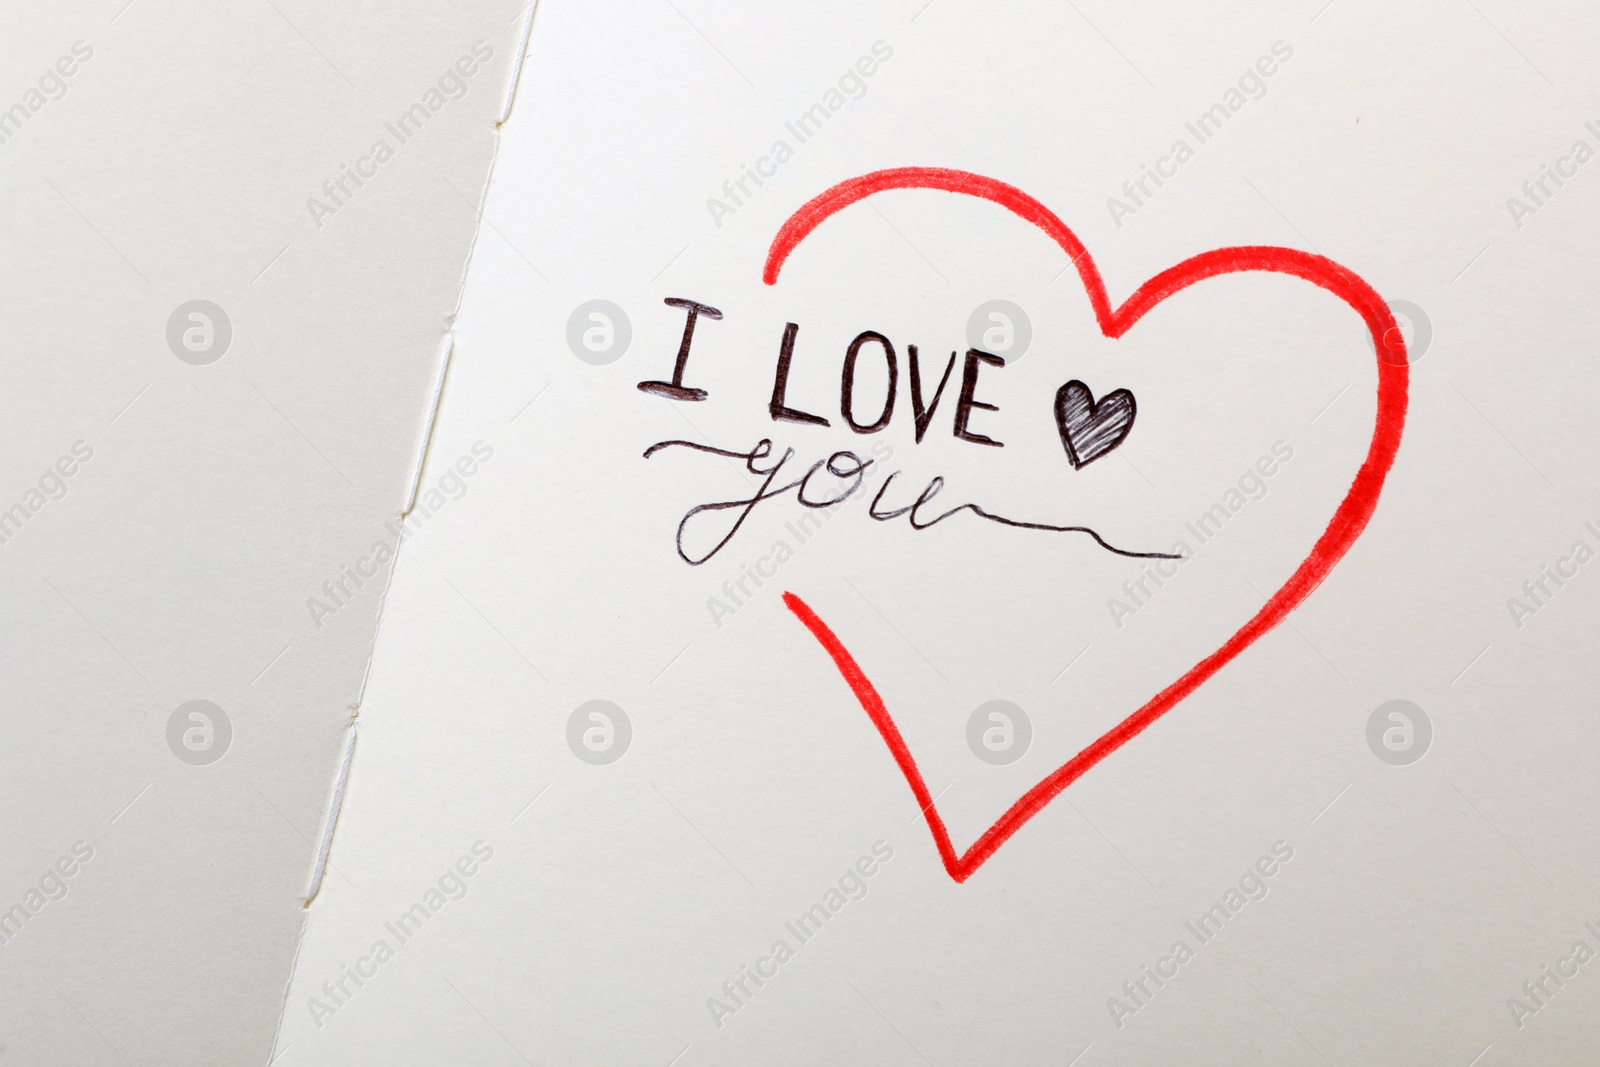 Photo of Phrase I Love You and heart drawings on notebook page